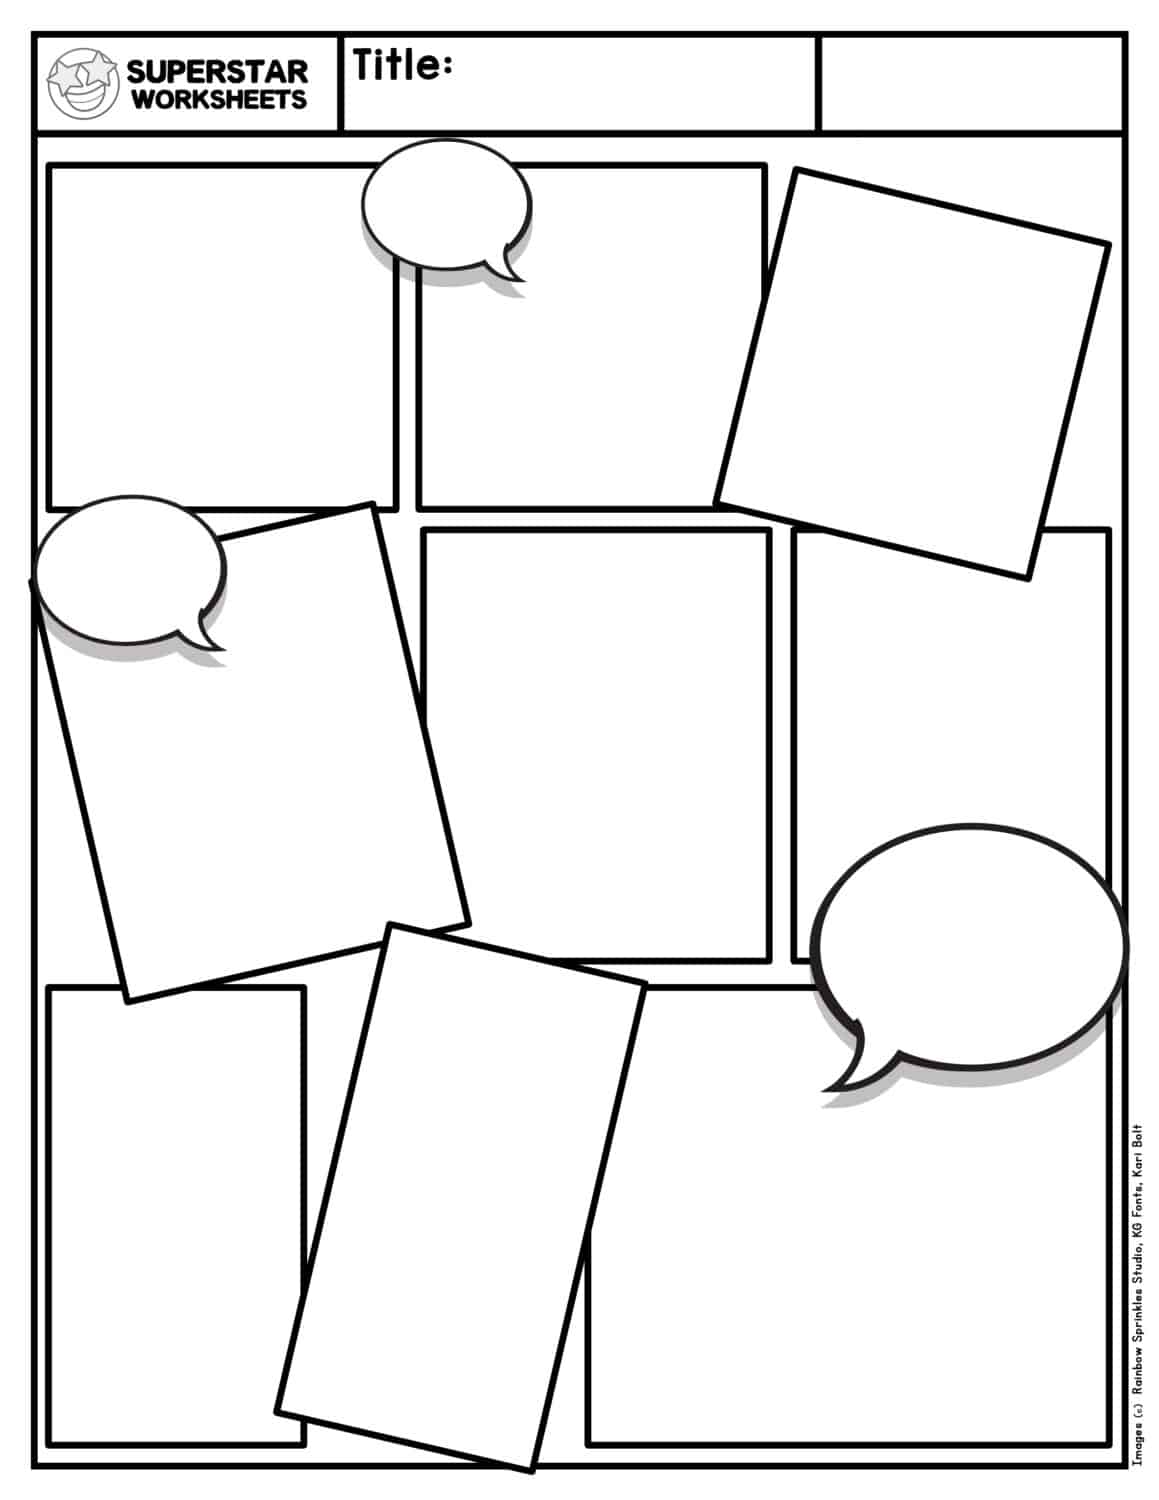 Free Printable Comic Strip Templates You Can Customize, 55% OFF